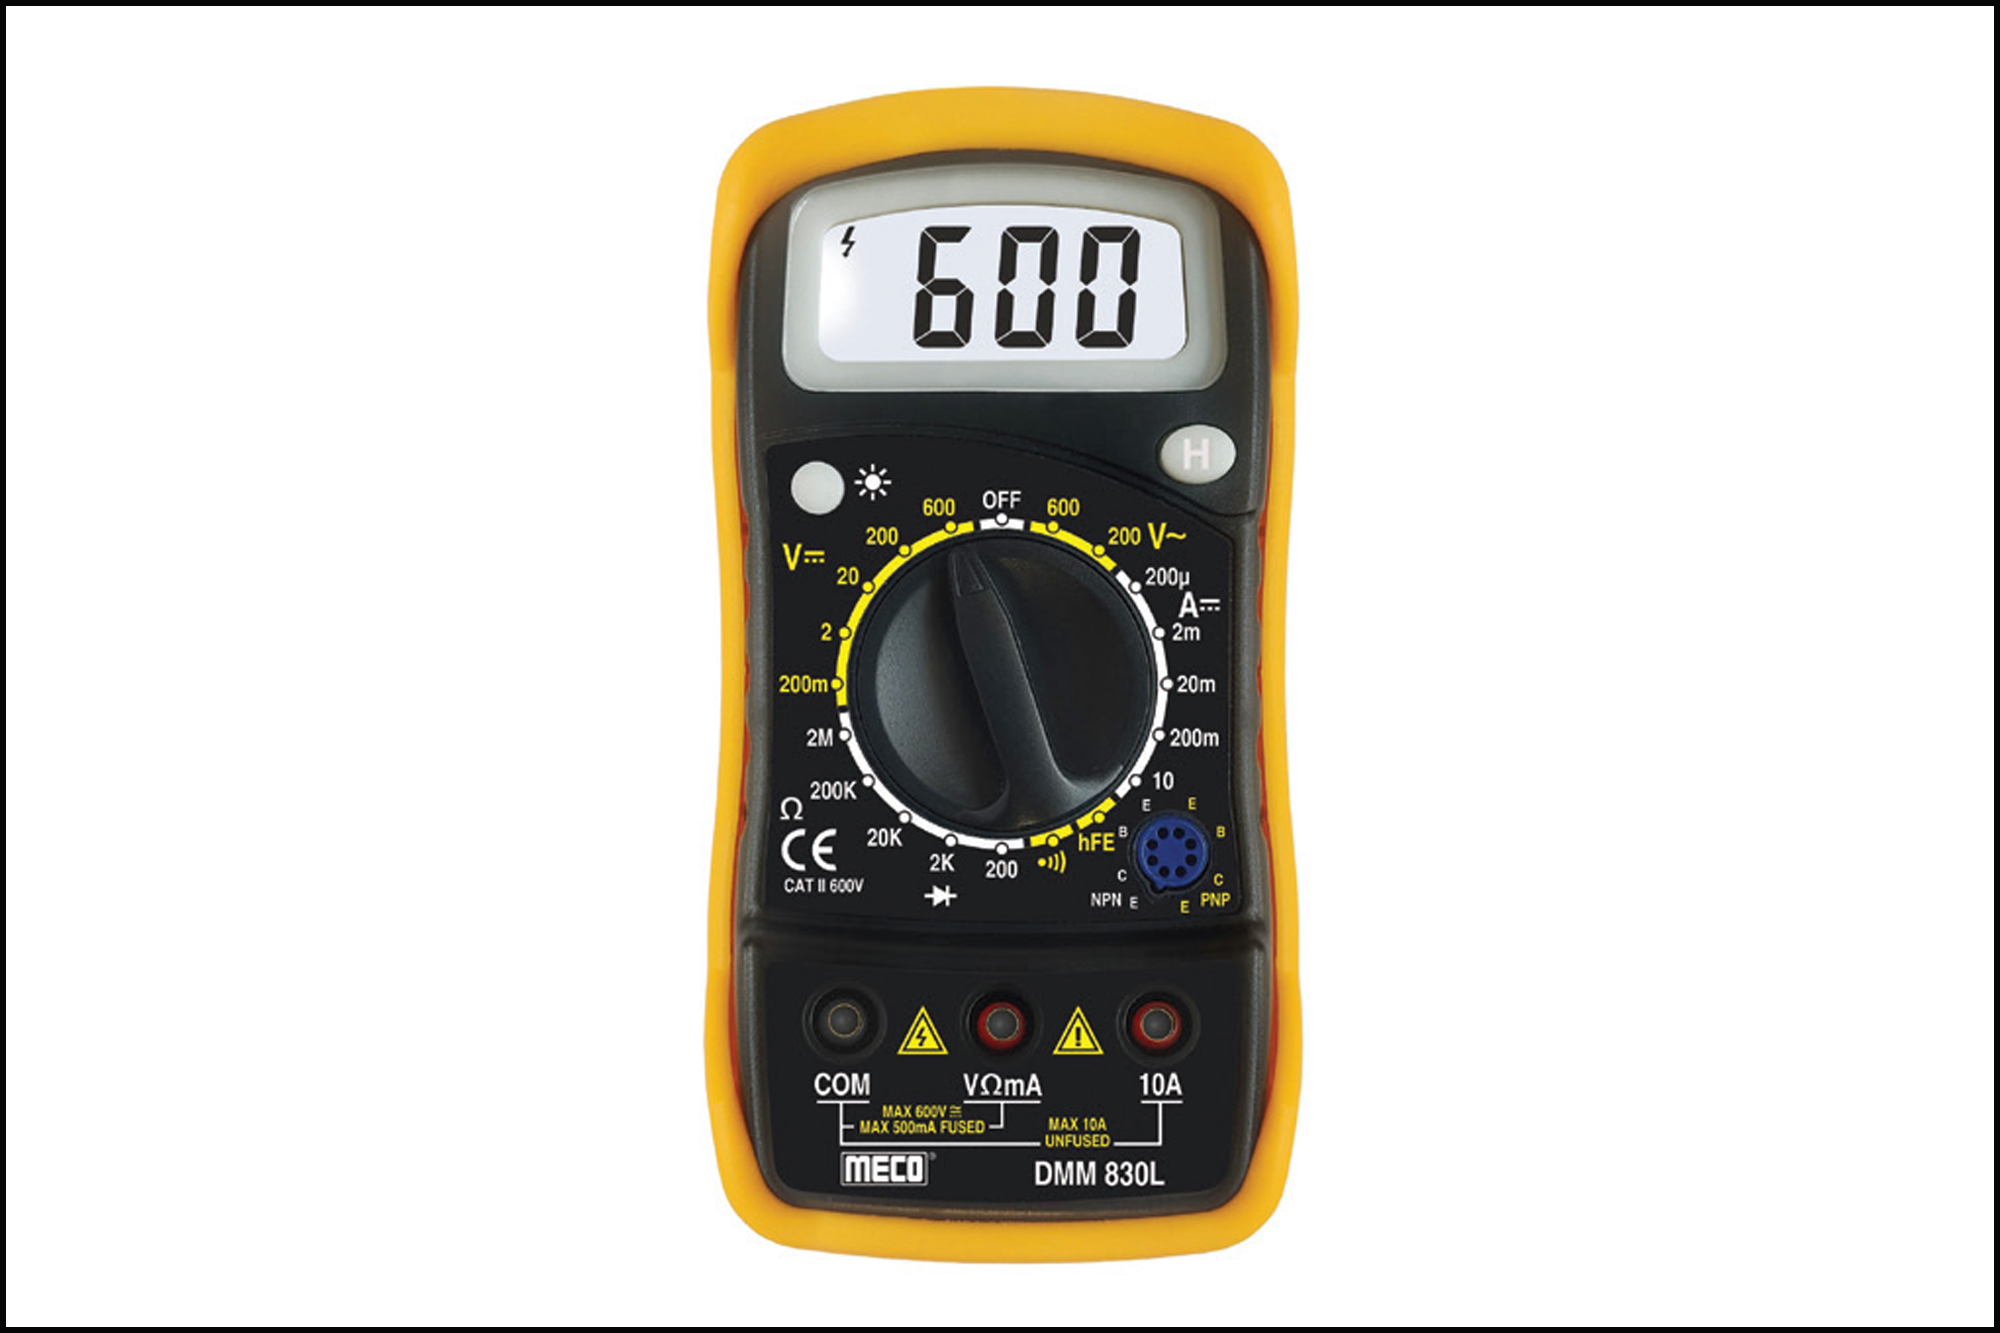 Innovative digital multimeter DMM 830L provides unparalleled visibility and precision